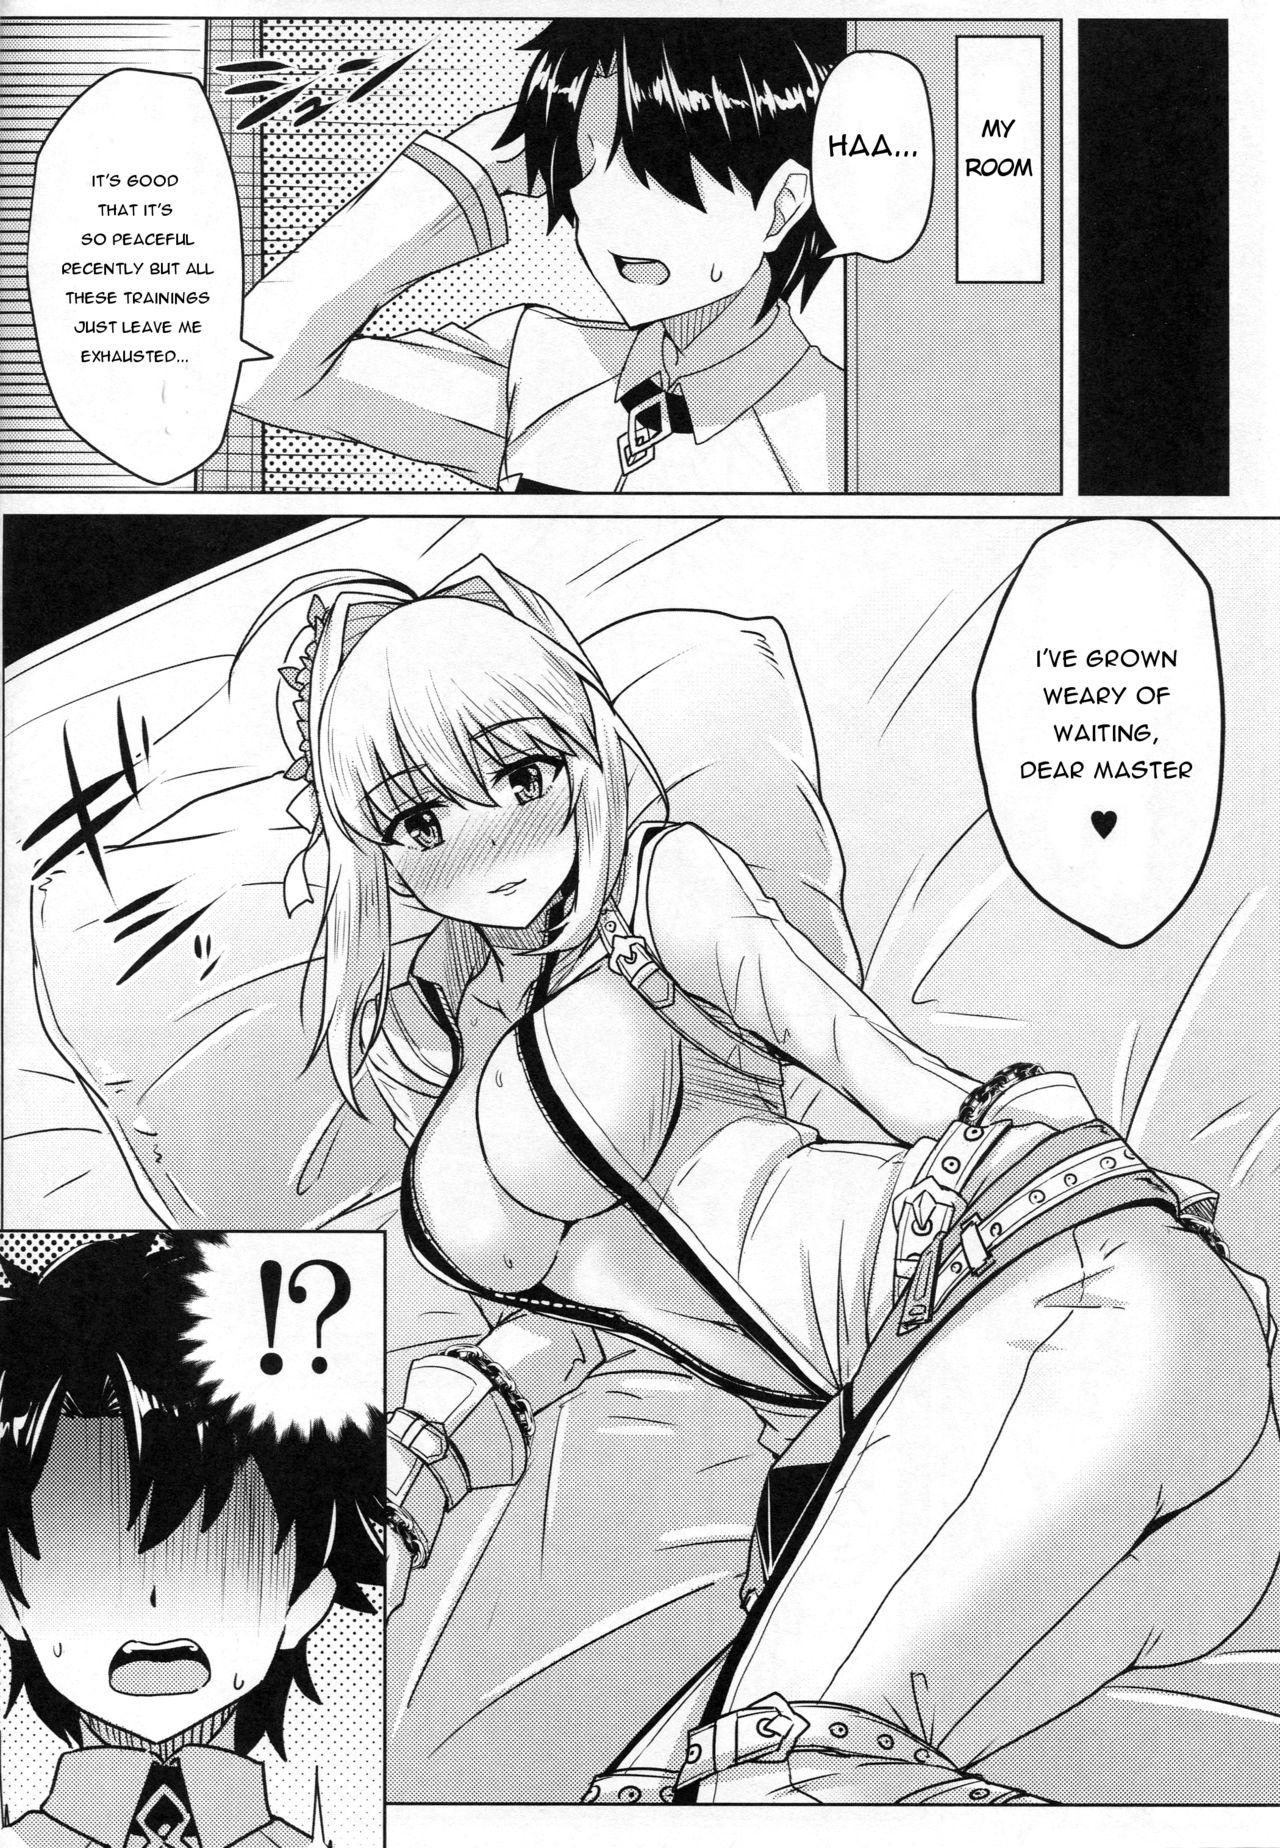 Femboy Nero to Love Love My Room! - Fate grand order Indoor - Page 7